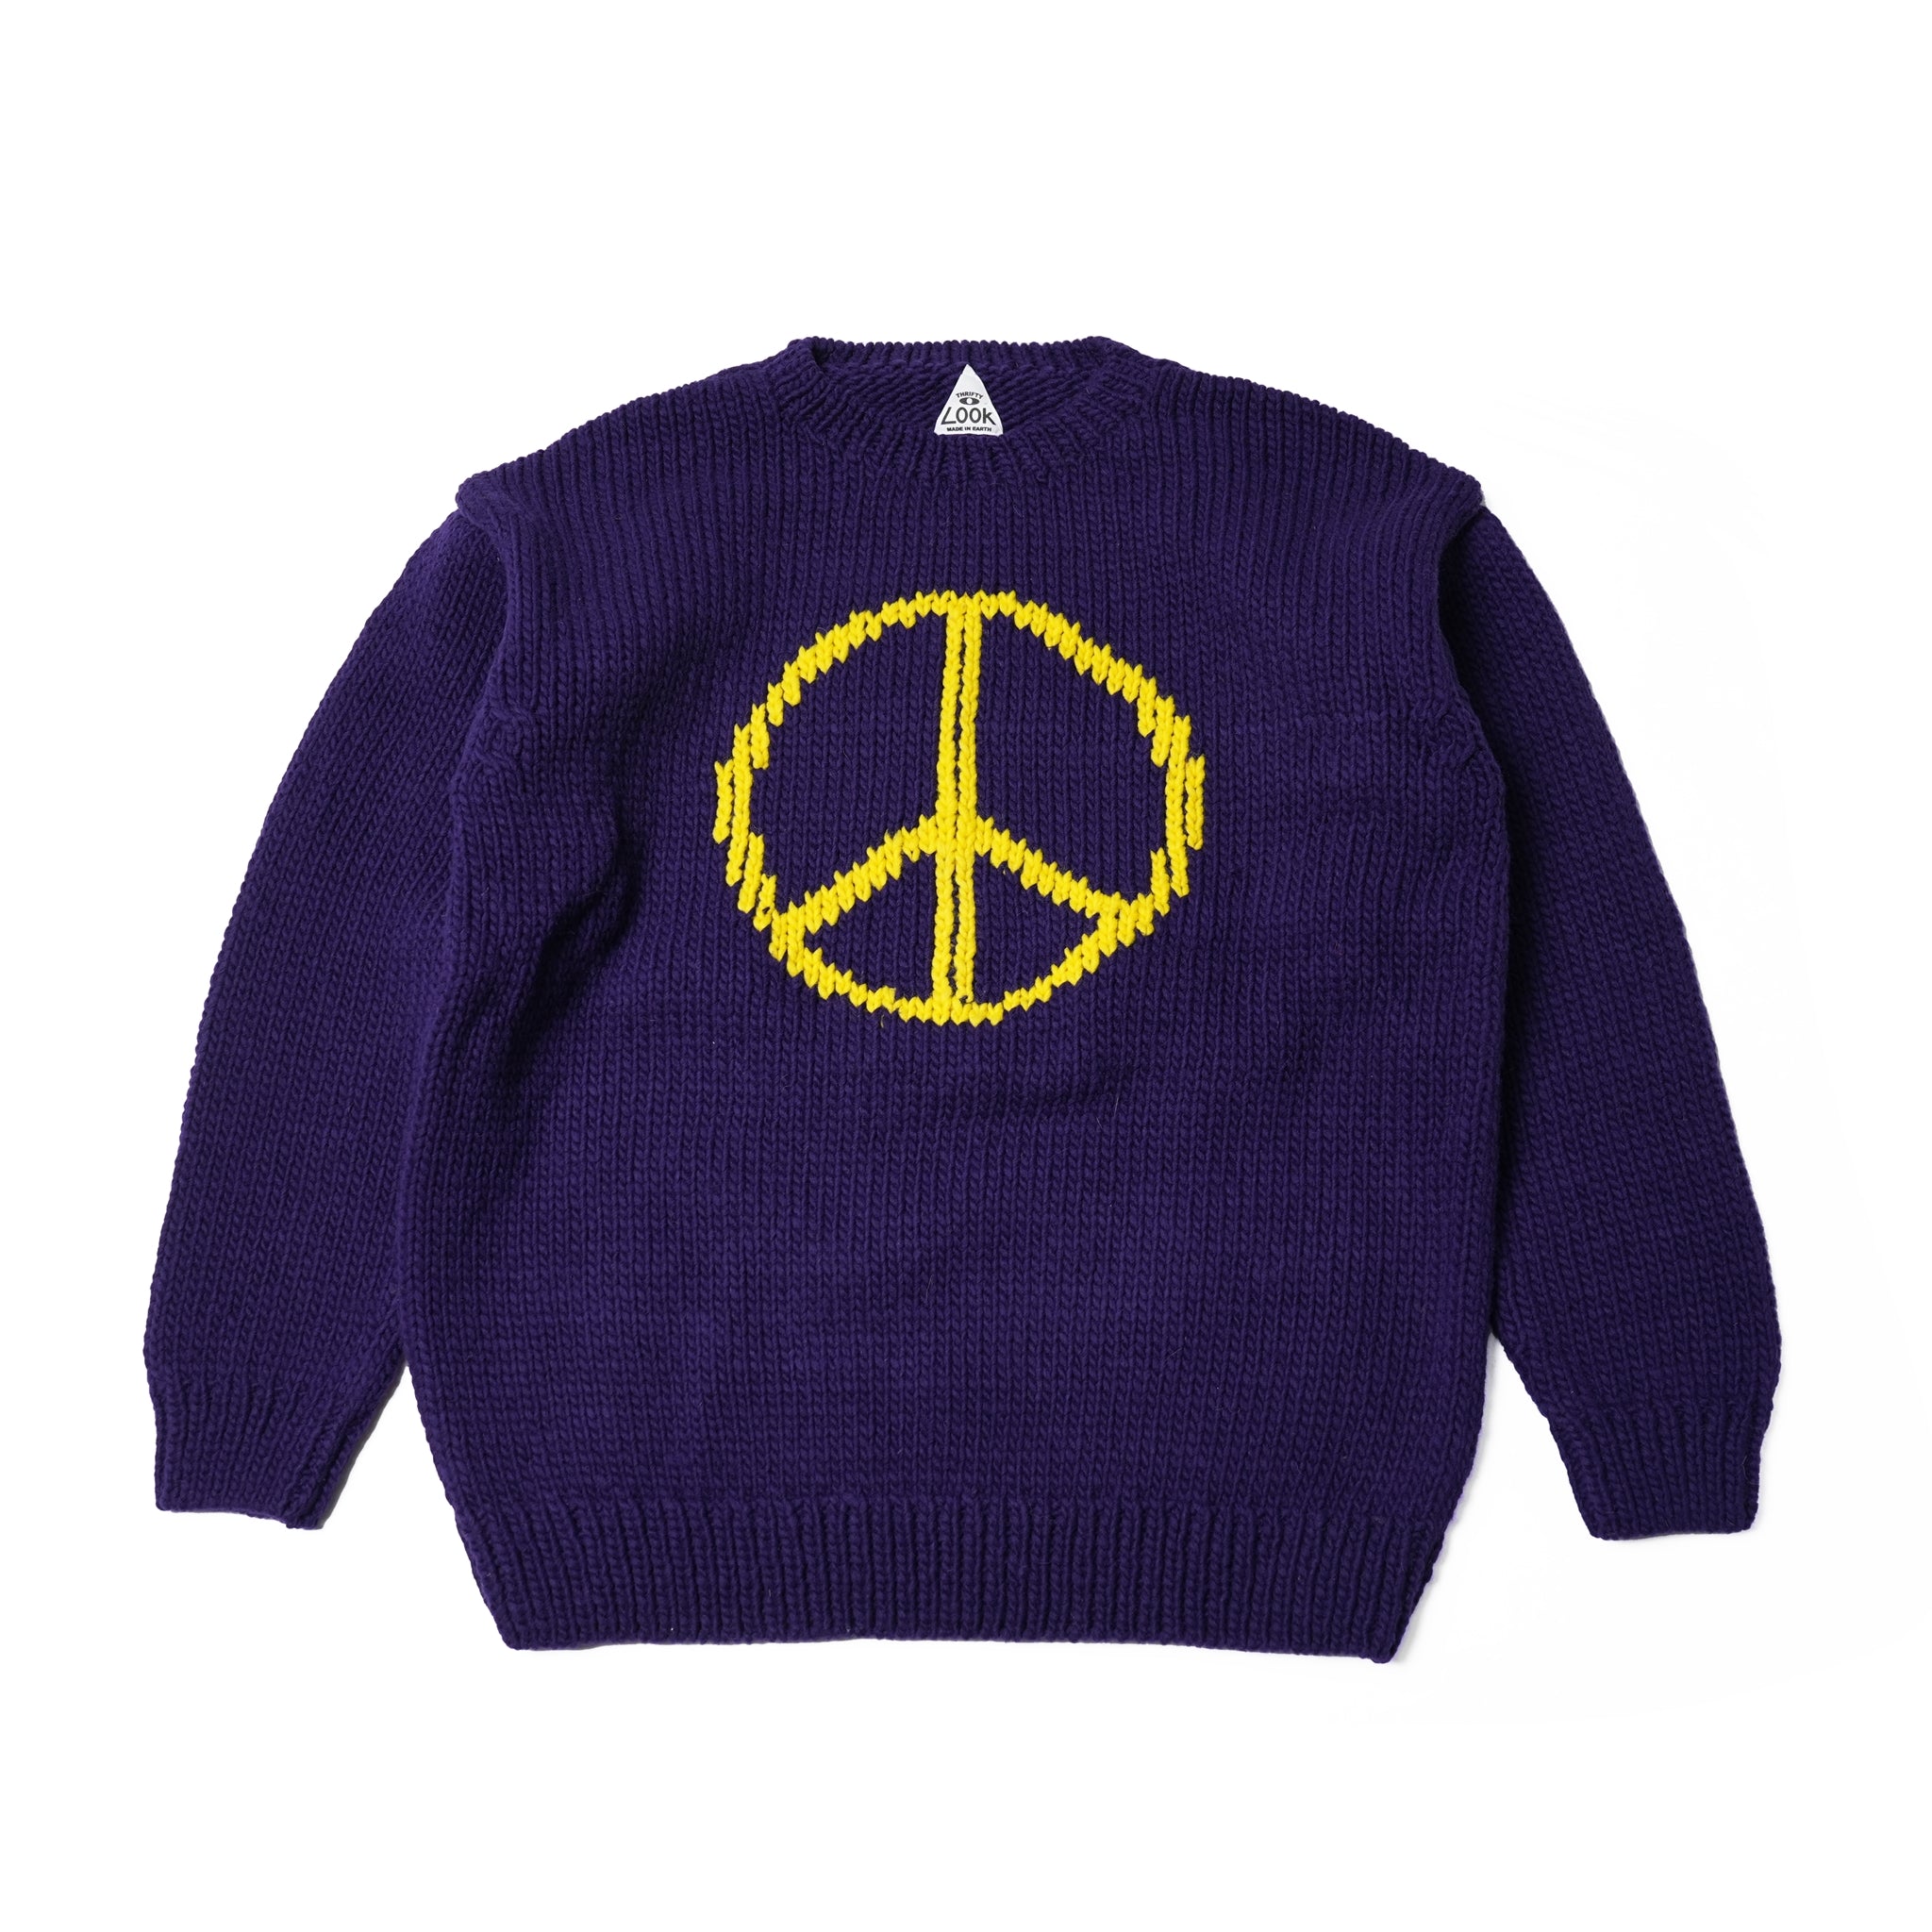 No:tl23f002a | Name:peace hand knit crew | Color:Purple【THRIFTY LOOK_スリフティールック】